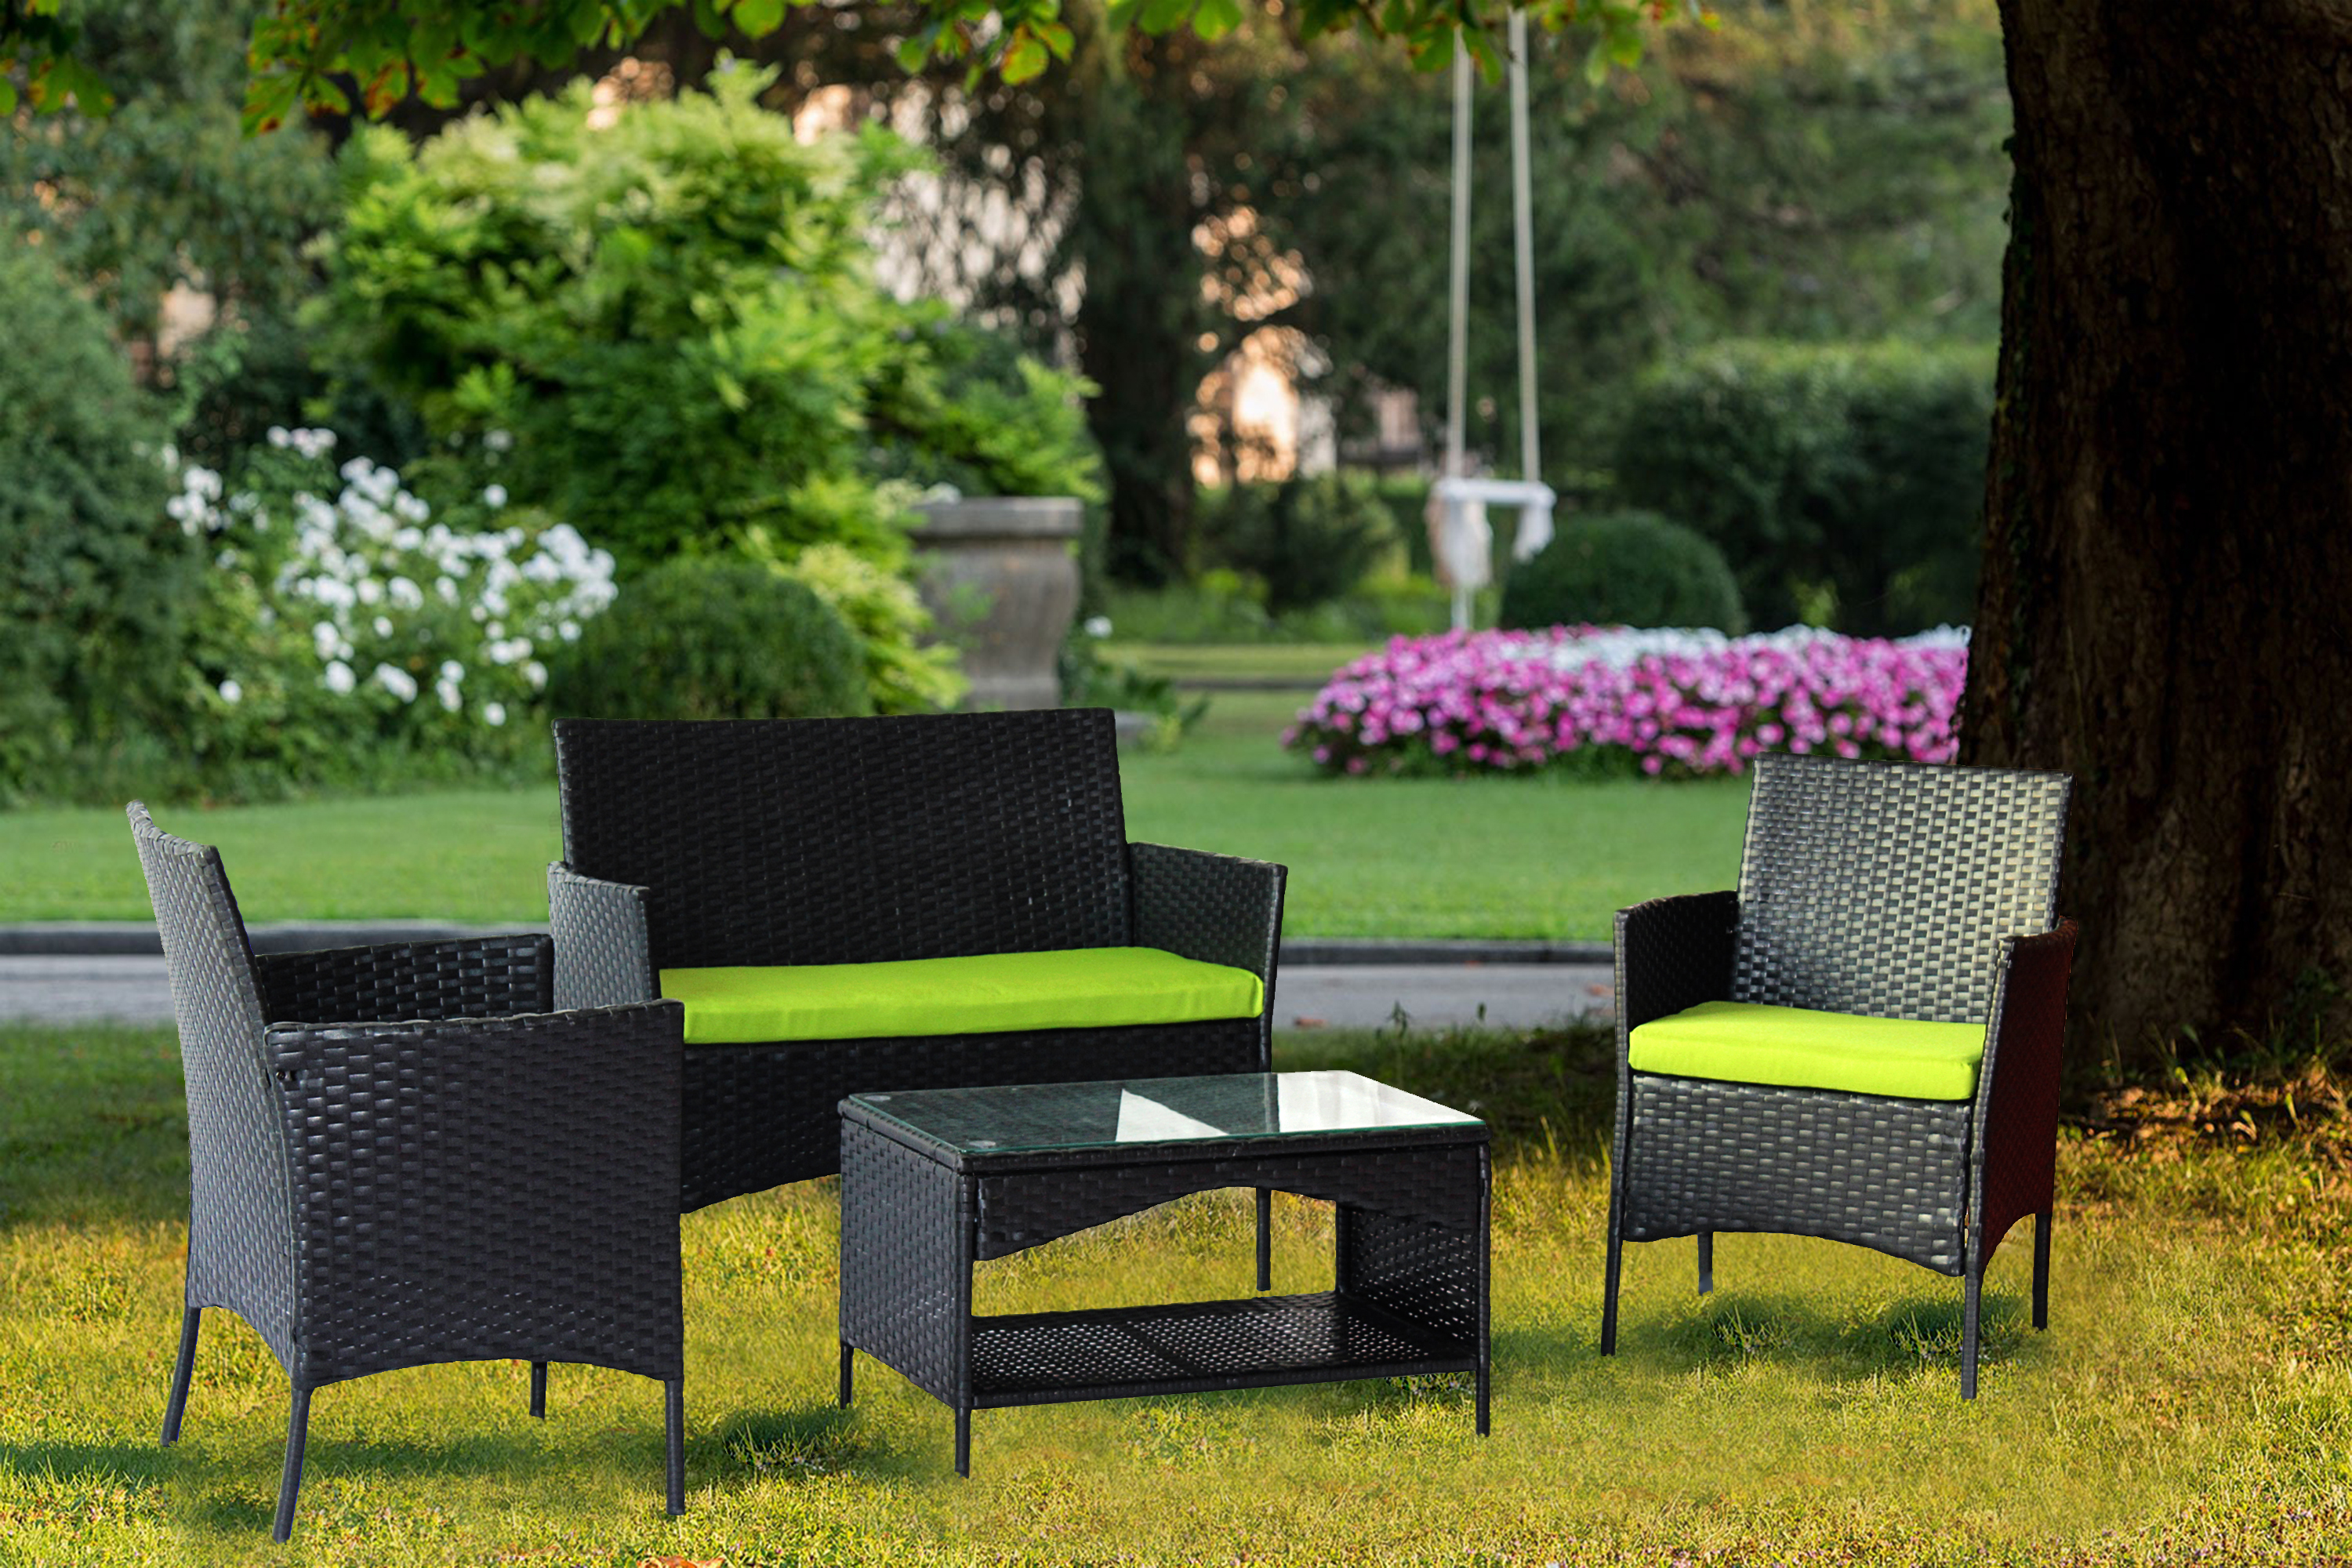 Outdoor Patio Set, iRerts Modern 4 Pieces Front Porch Furniture Sets, Rattan Wicker Patio Furniture Set with Green Cushion, Table, Patio Conversation Sets for Backyard Garden Poolside, Black, R2389 - image 2 of 8